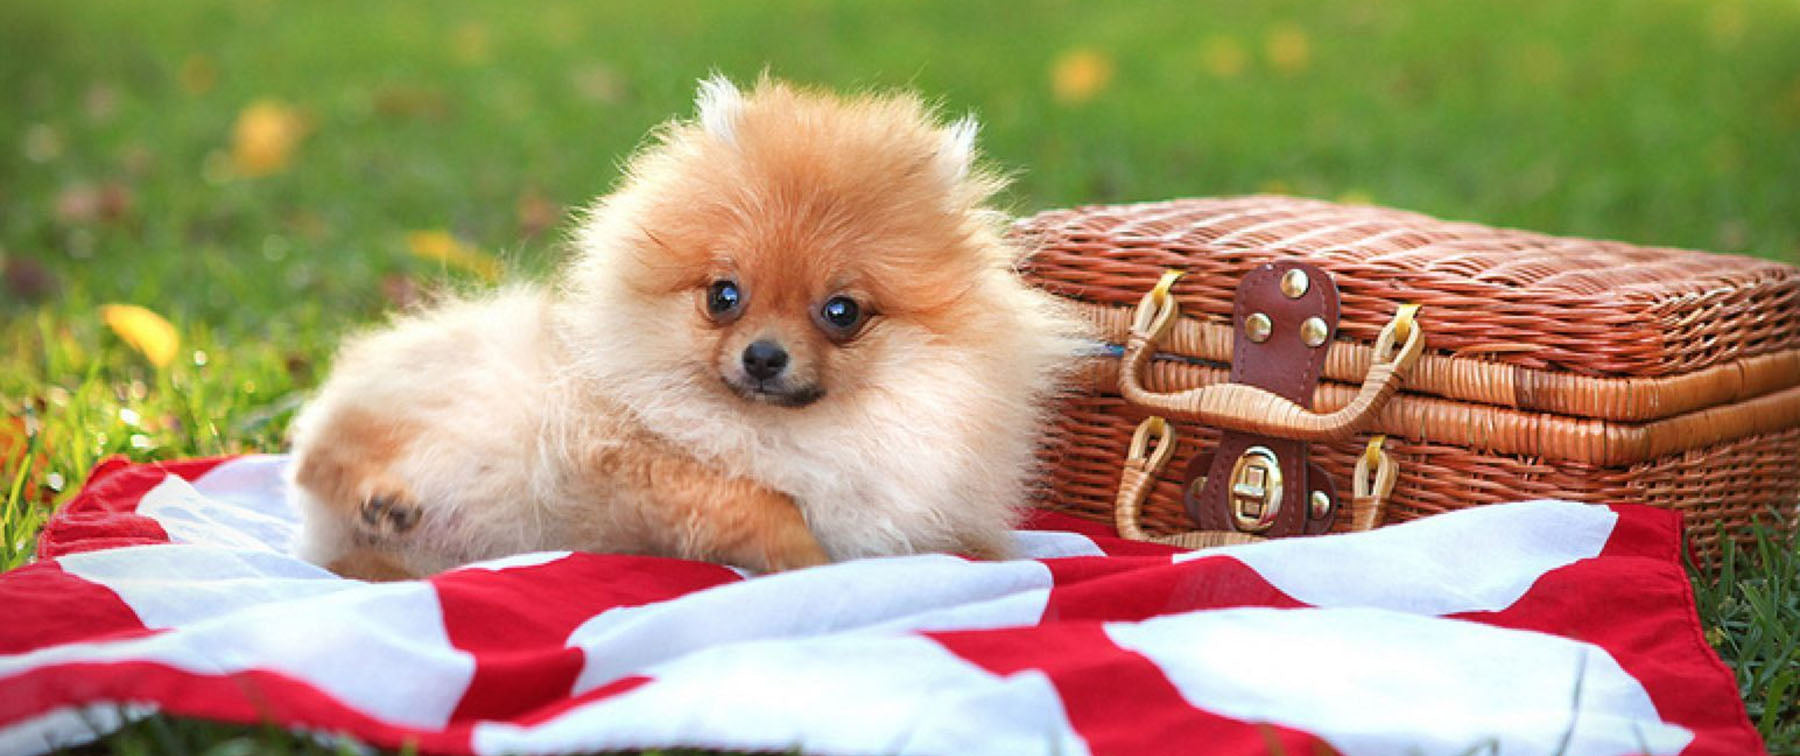 Summer Picnic with the Dog? Woof Woof!